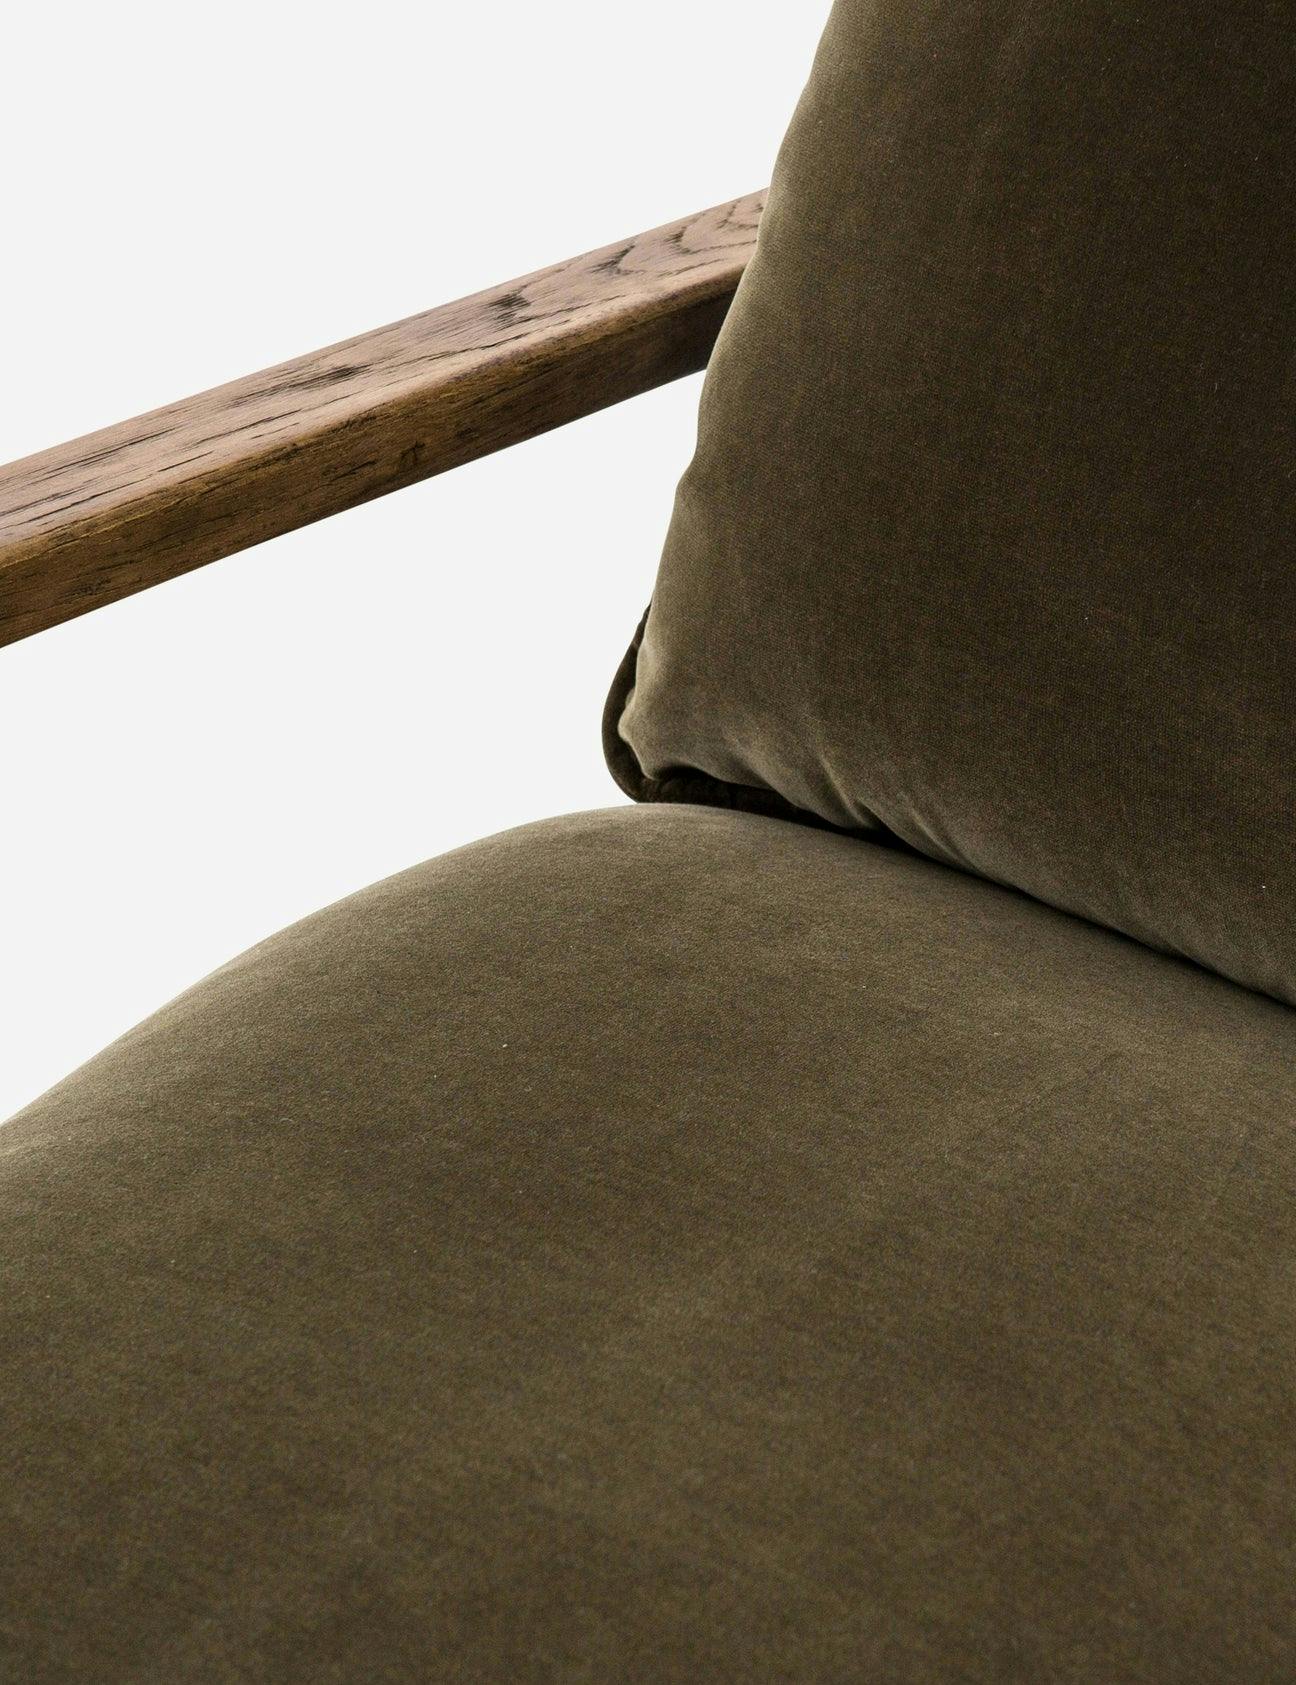 Krista Accent Chair - Olive Green